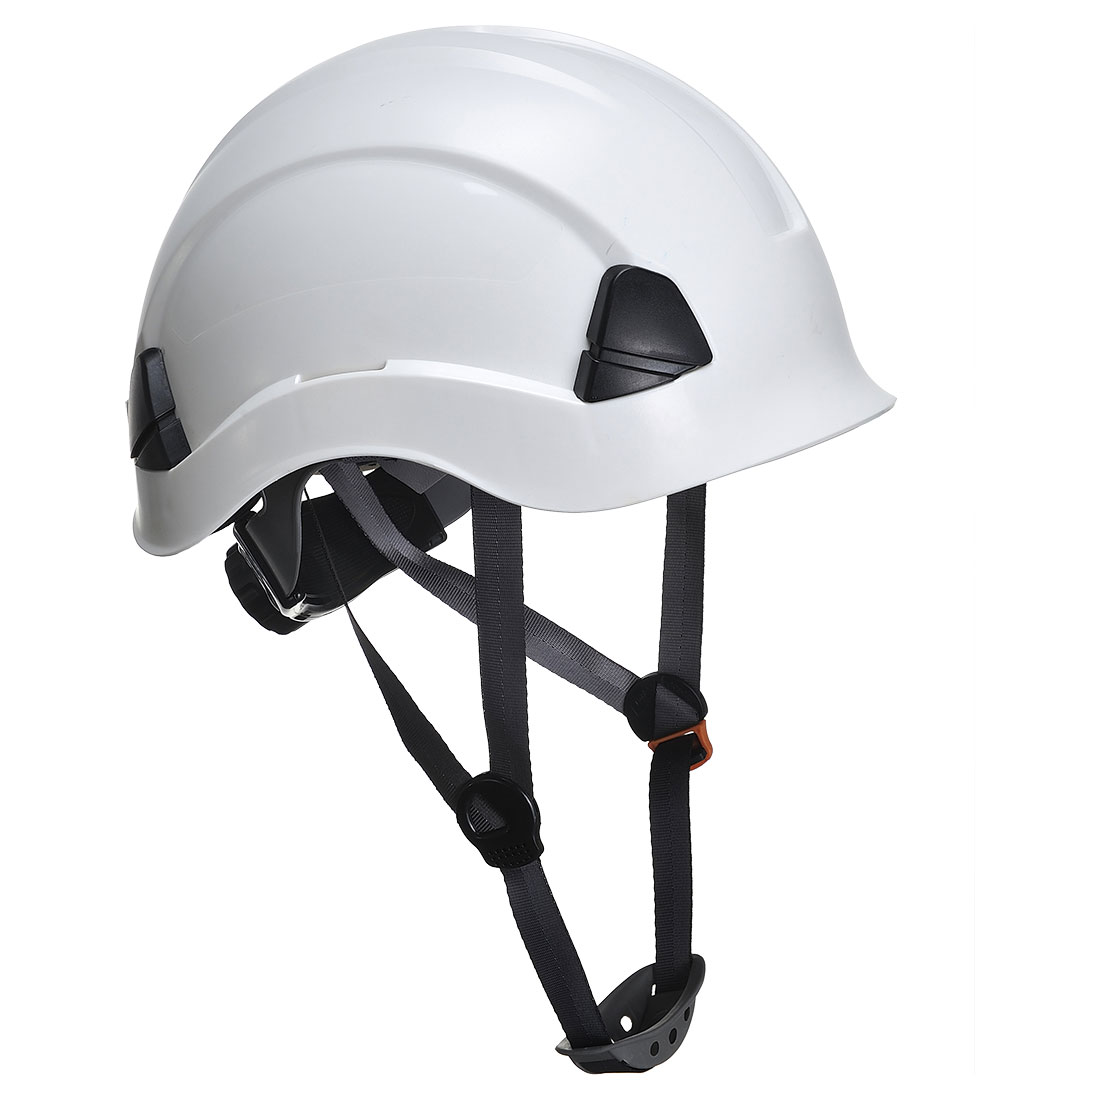 PS53 Portwest® Height Endurance Hard Hat - White